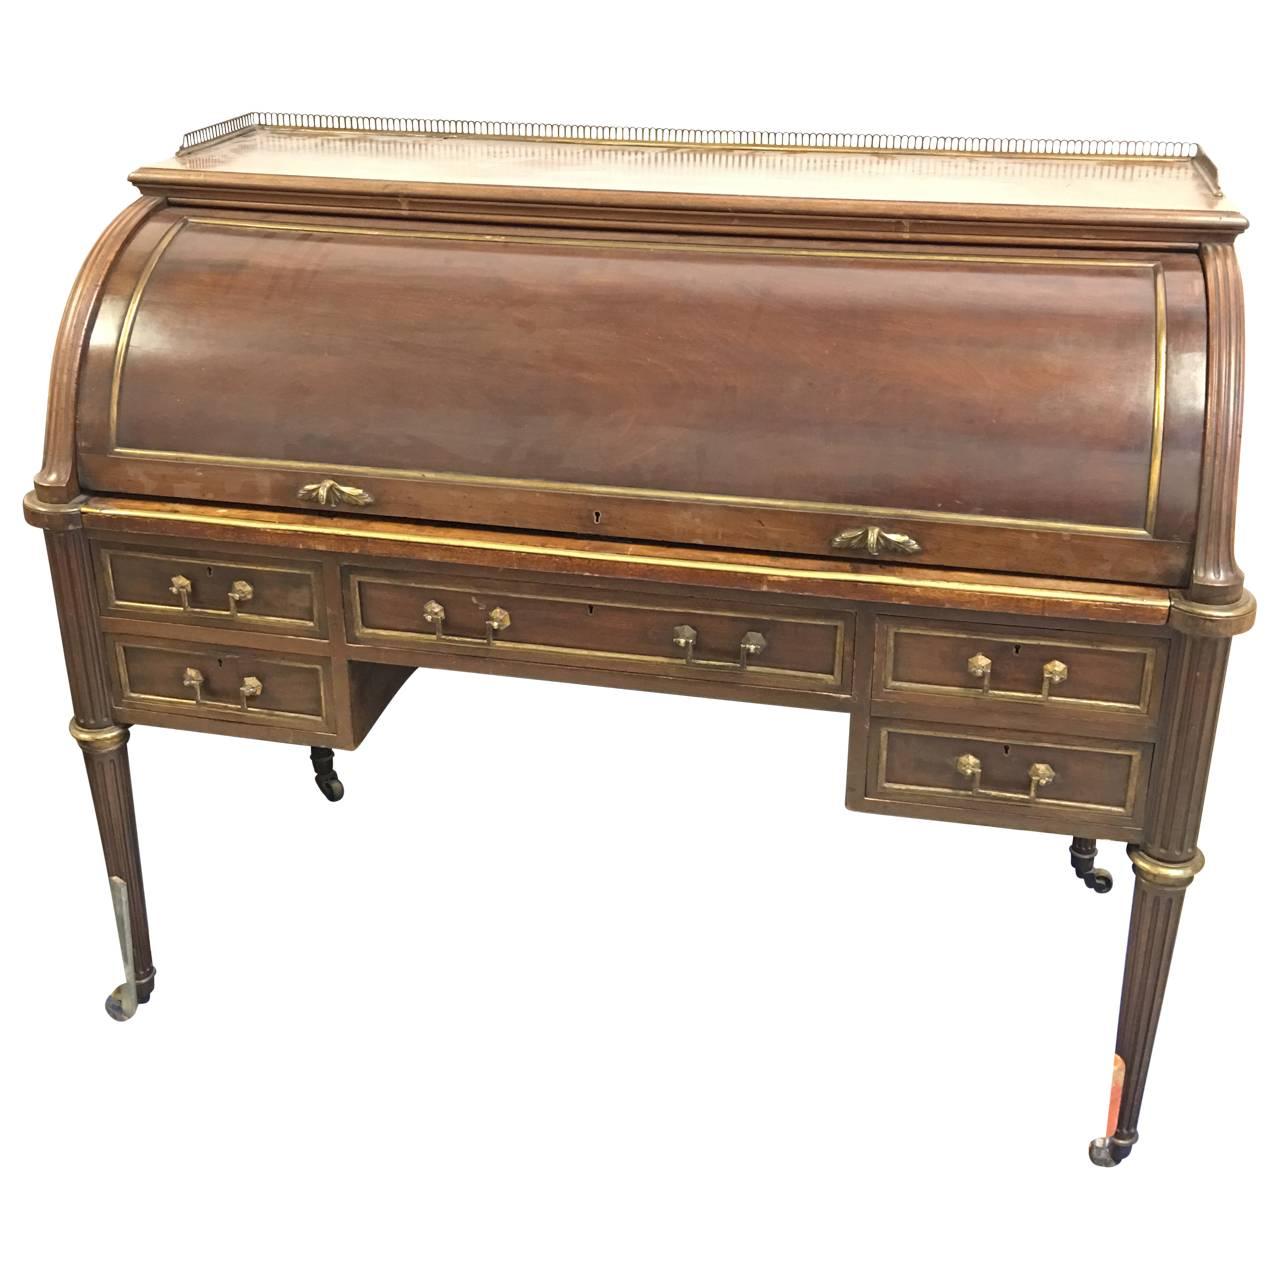 Antique cylinder desk from the London Savoy Hotel, label no 968. 